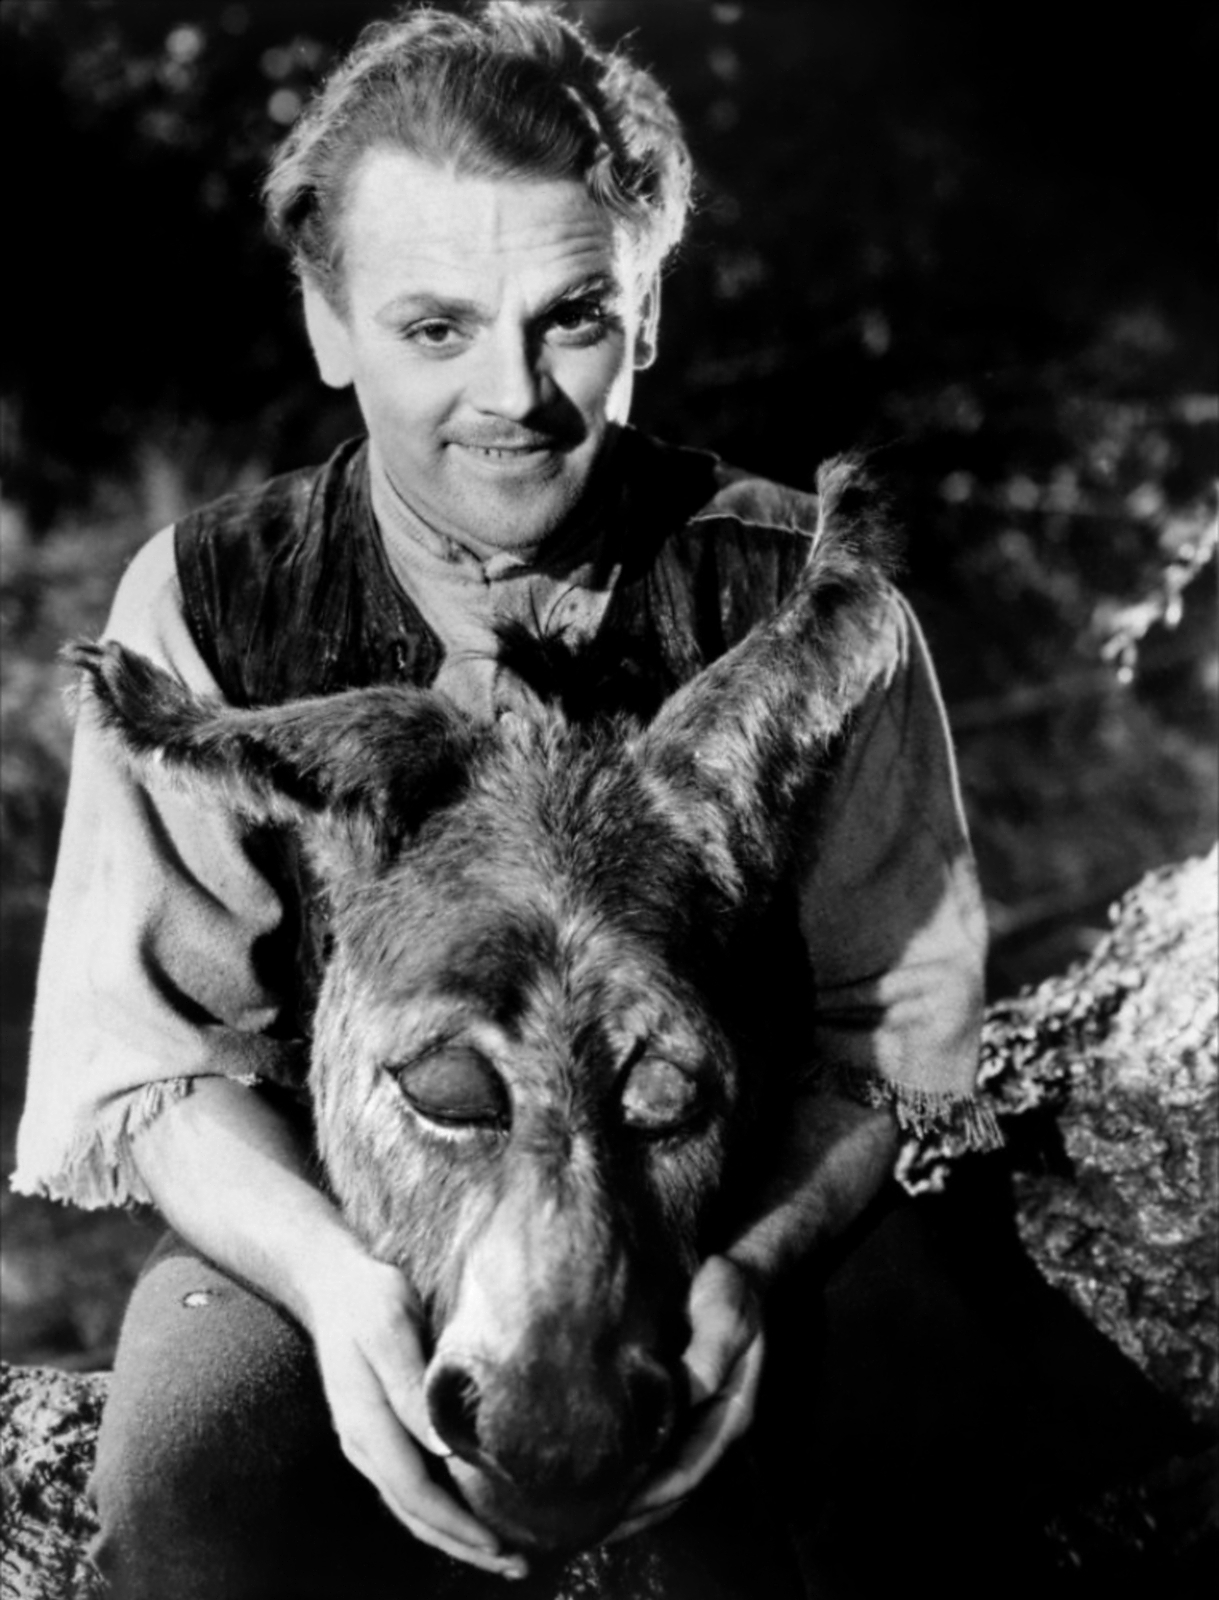 http://www.doctormacro.com/Images/Cagney,%20James/Annex/Annex%20-%20Cagney,%20James%20(A%20Midsummer%20Night%27s%20Dream)_02.jpg